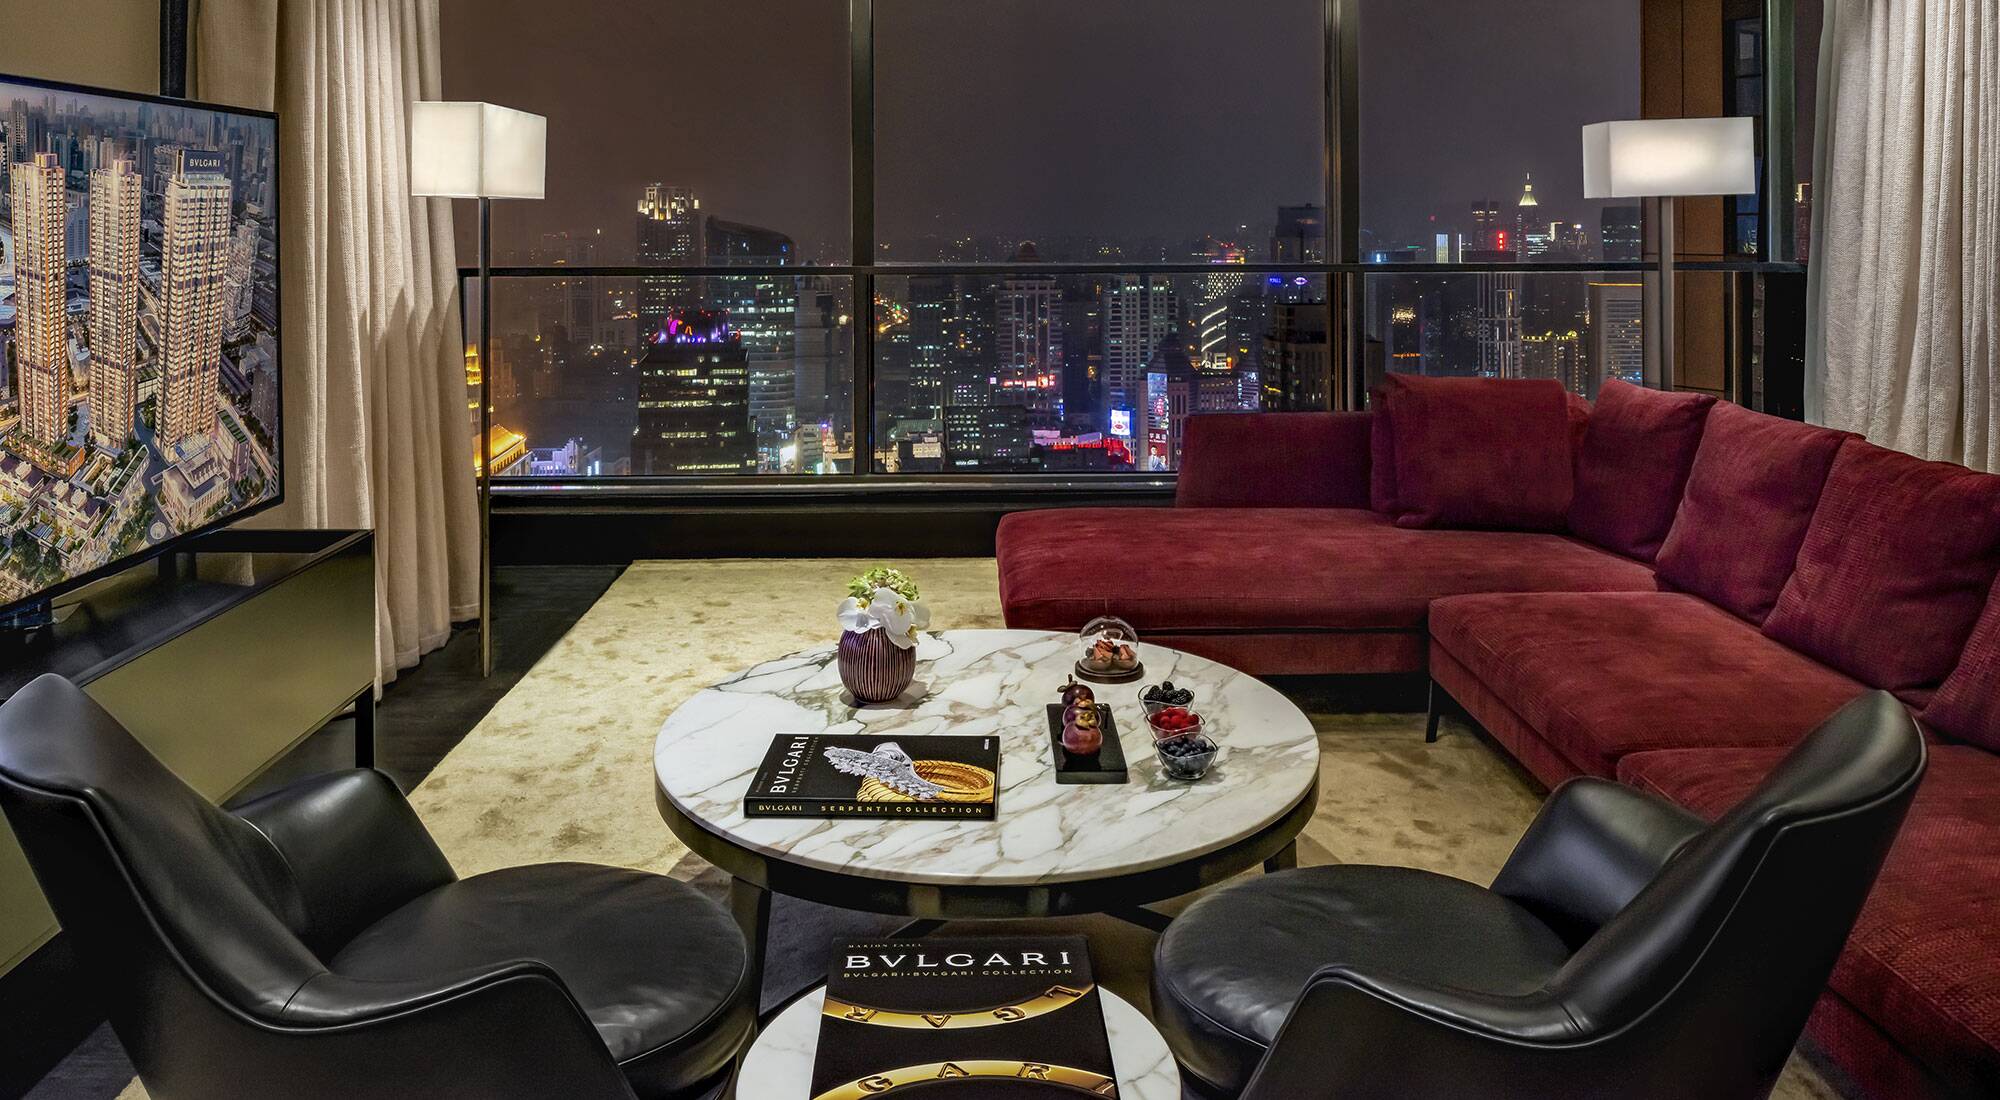 Bulgari luxury hotel collection grows with new property in Shanghai - LVMH